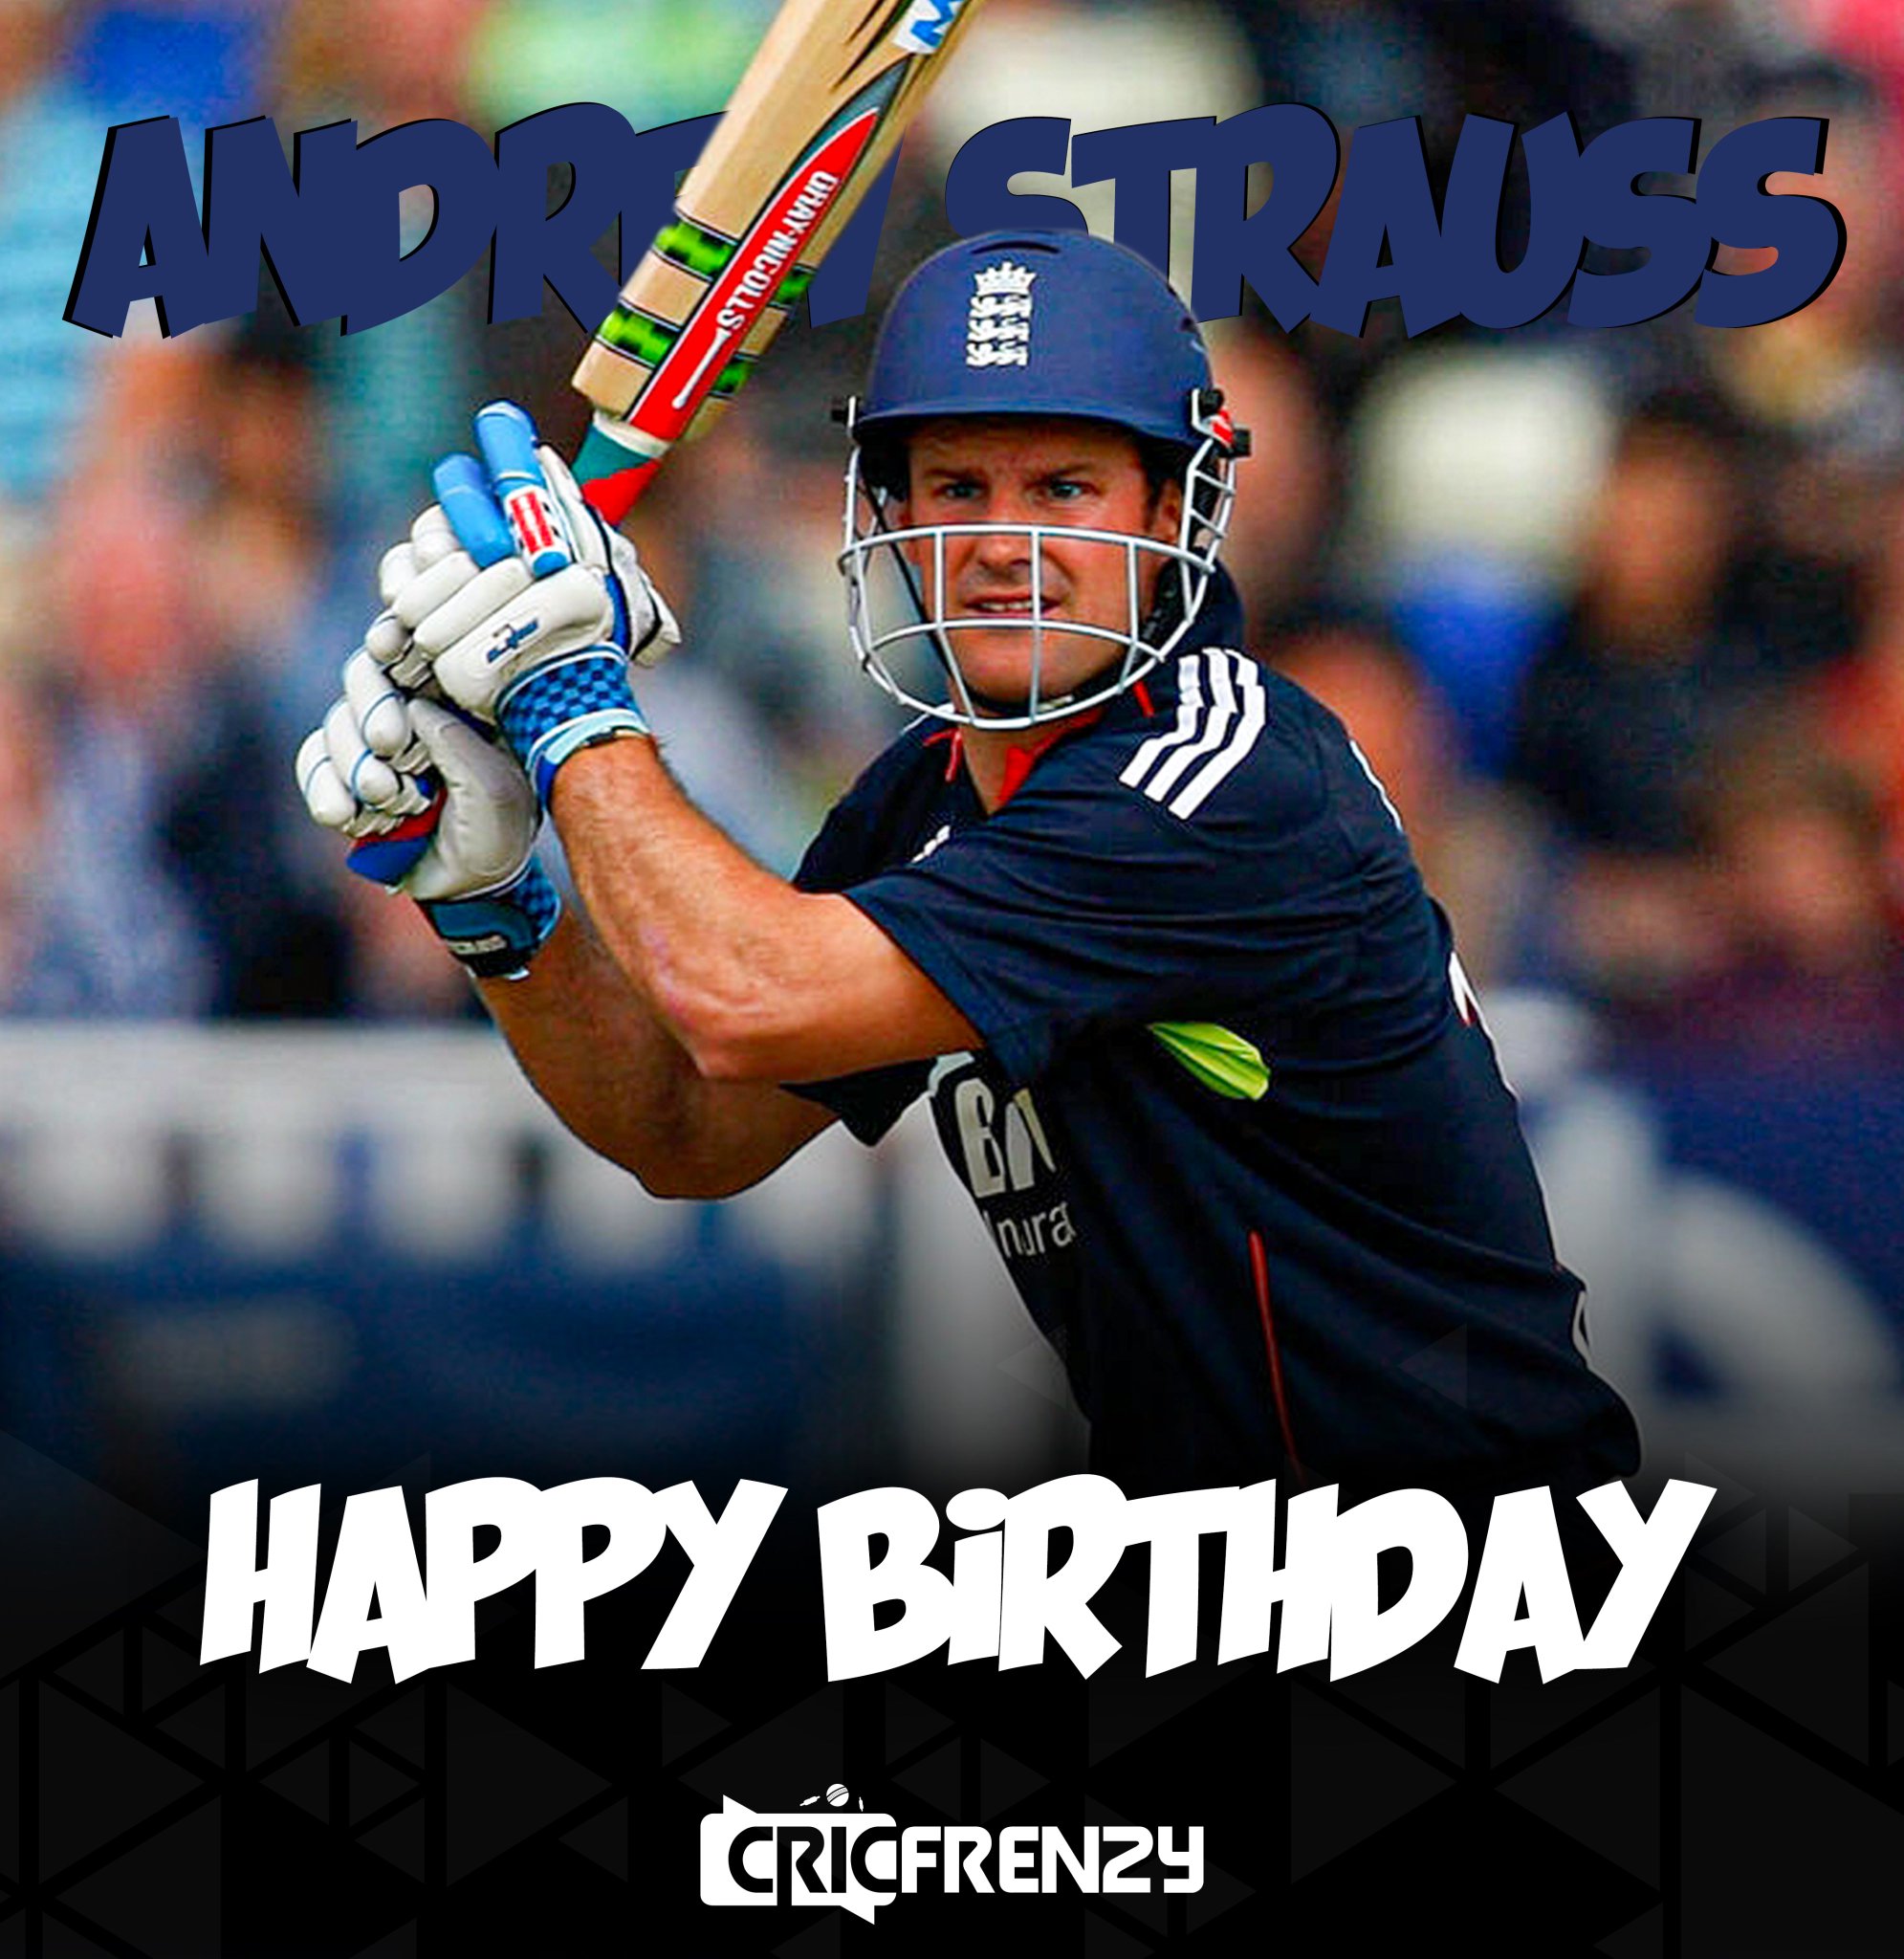 3rd English captain to win Ashes at home and Australia
Happy birthday Andrew Strauss    